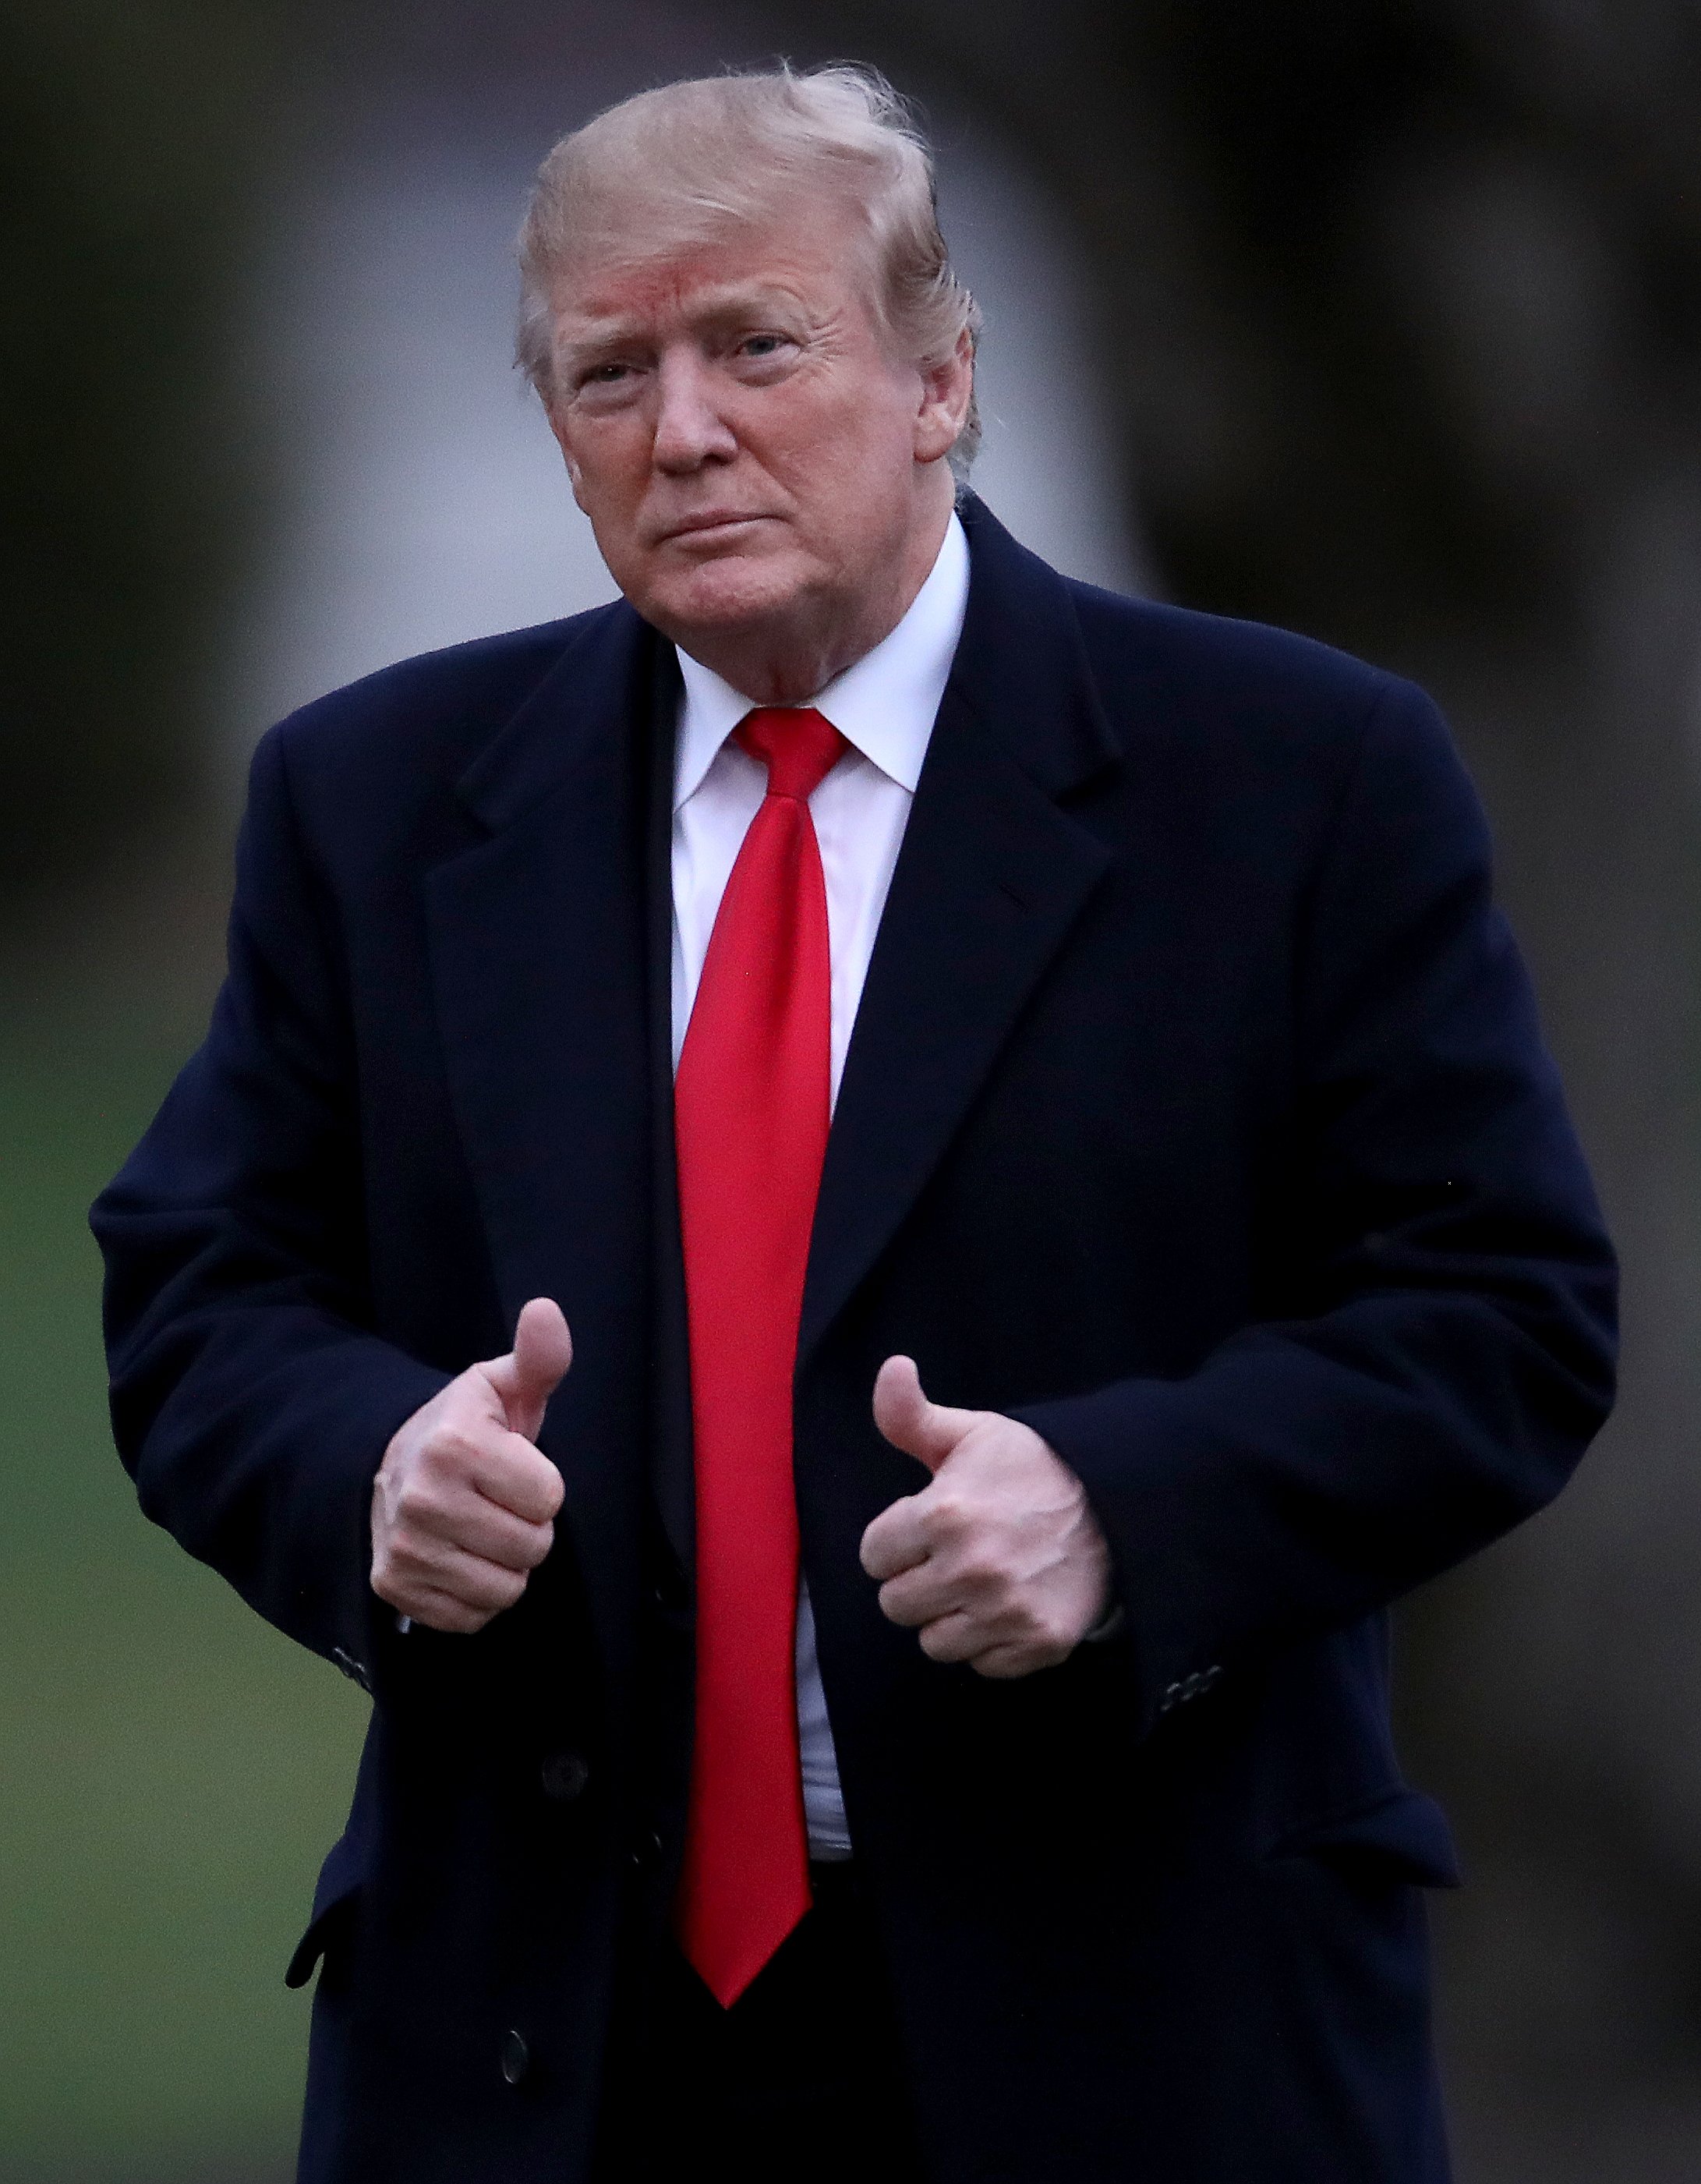 U.S. President Donald Trump gives a thumbs up sign to supporters who applauded as he returned to the White House after spending the weekend in Florida March 24, 2019 in Washington, DC. (Photo by Win McNamee/Getty Images)